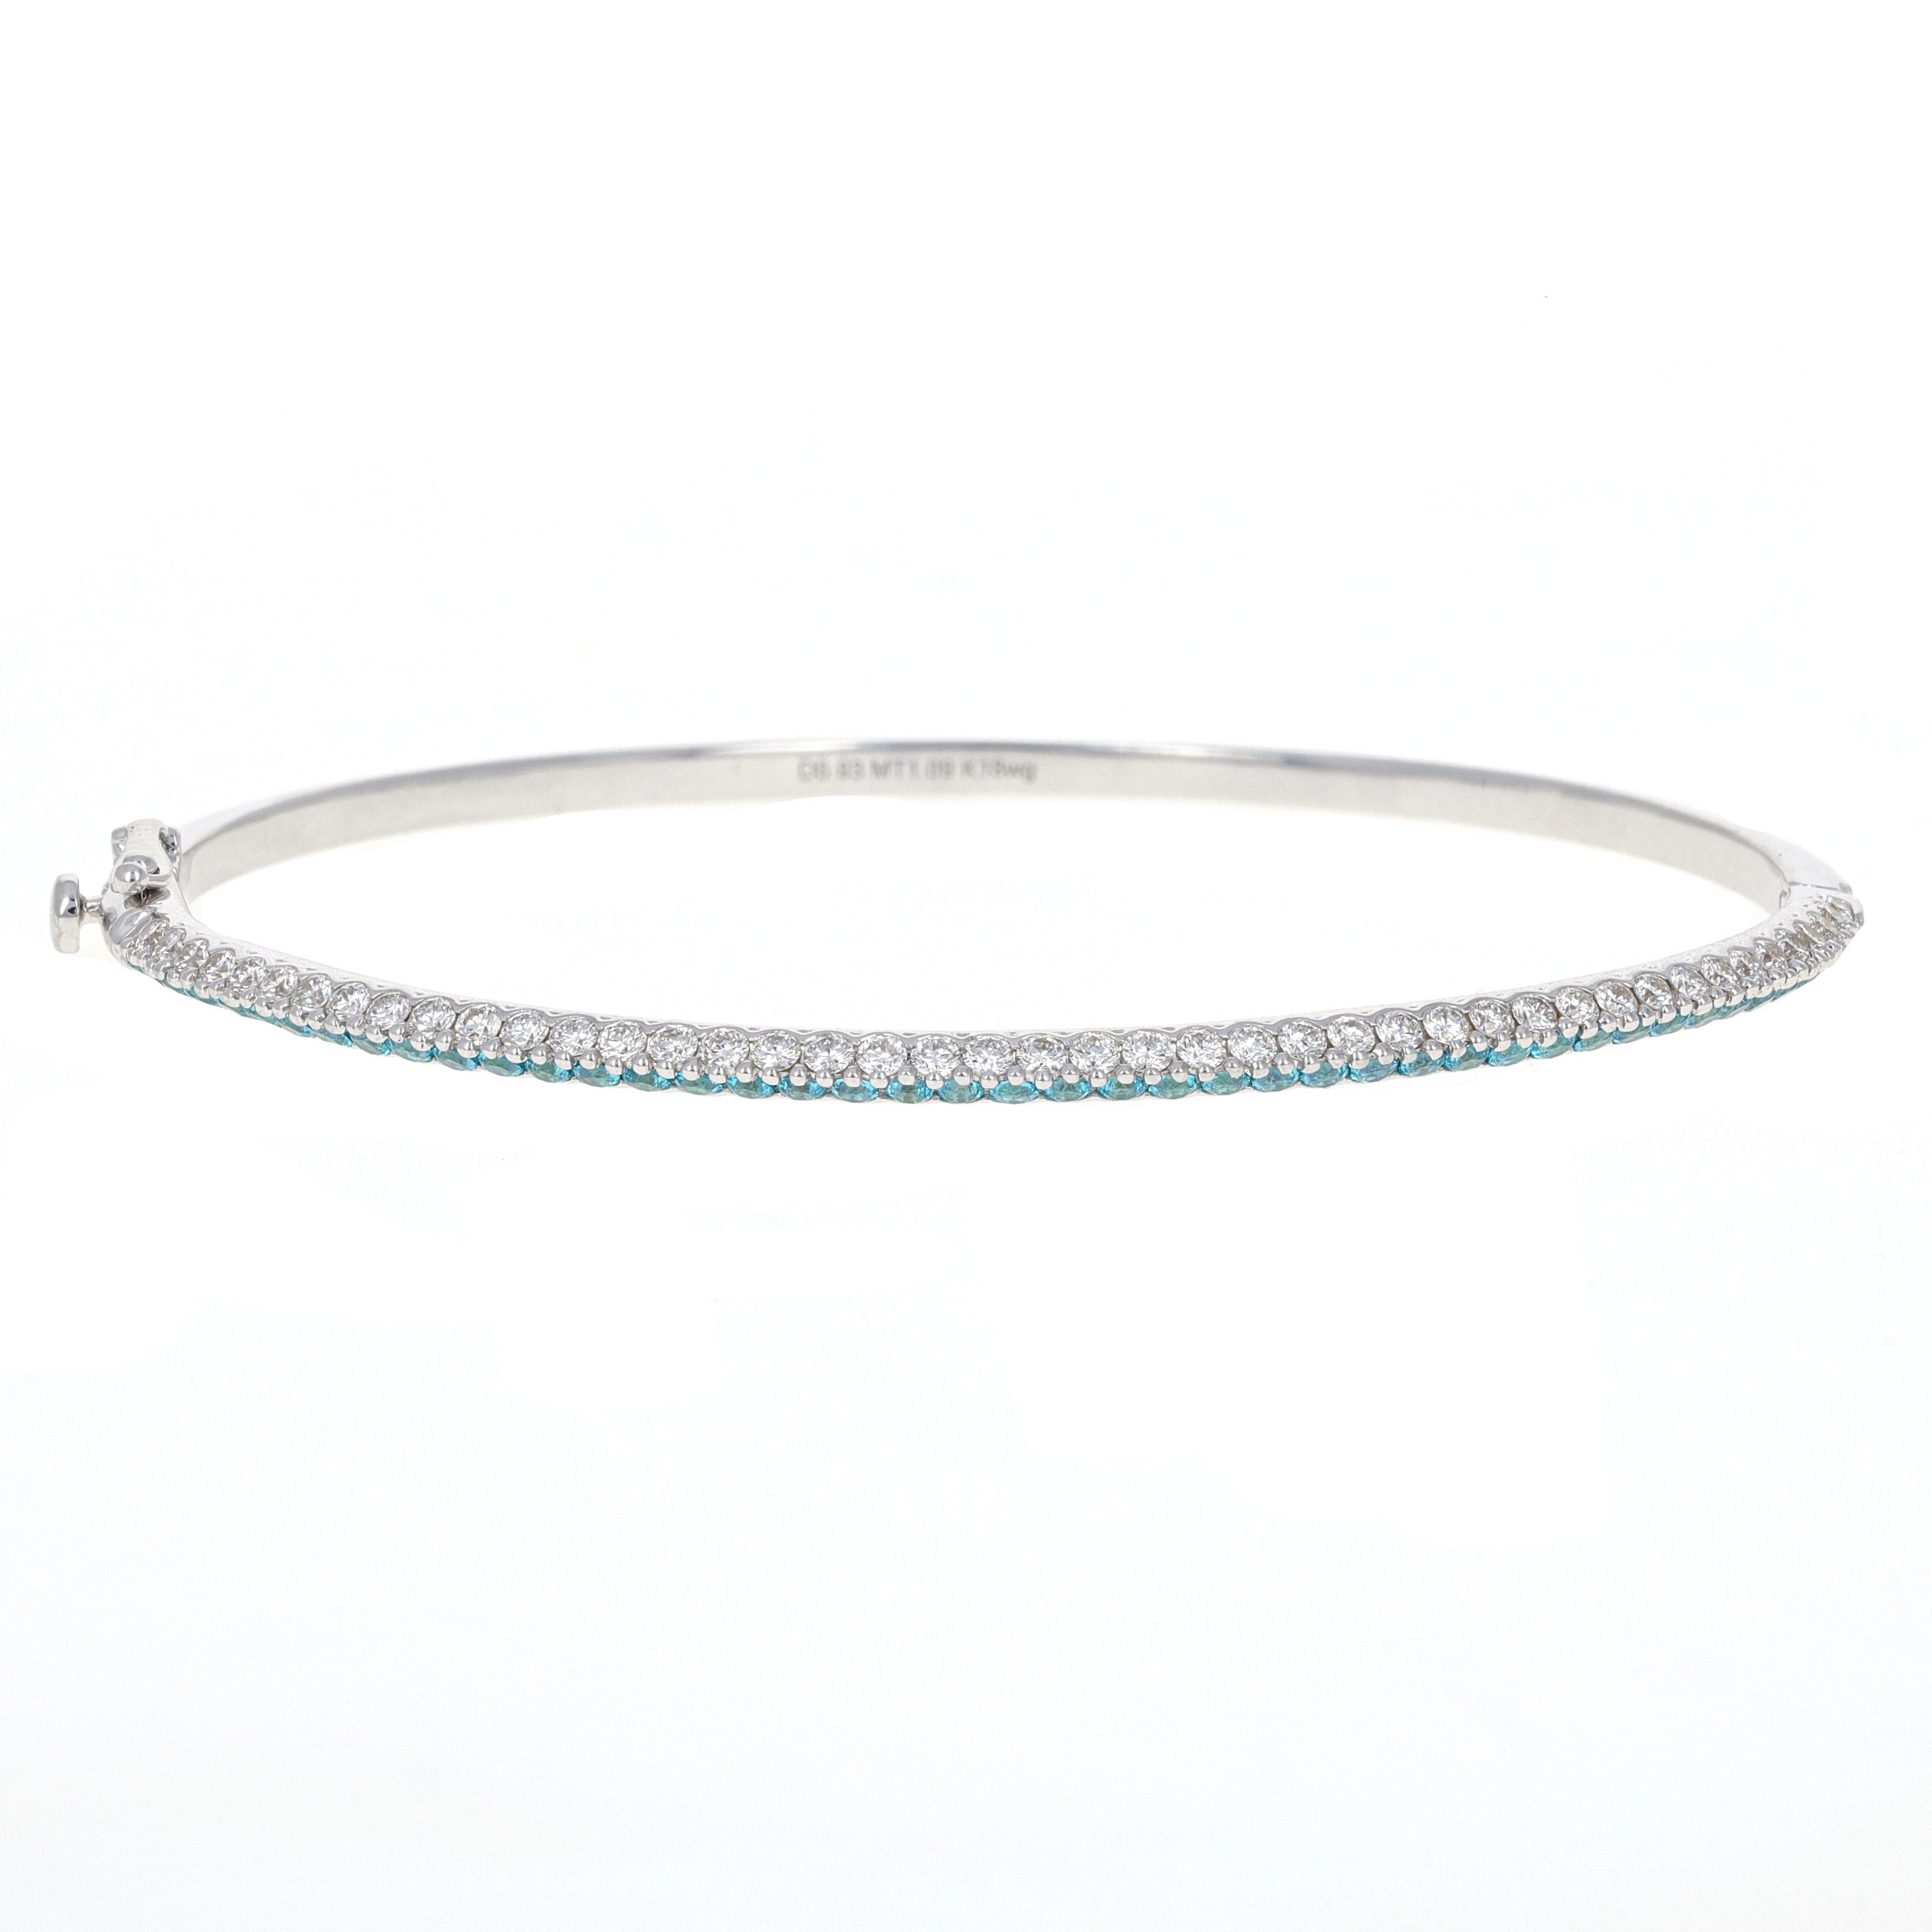 Beautiful stacking diamond and topaz bangle bracelet with a stylish knife edge. The bangle has 44 round brilliant white diamonds weighing a total of 0.93 carats and 44 mystic topaz stones weighing a total of 1.09 carats.
This bangle is very unique,